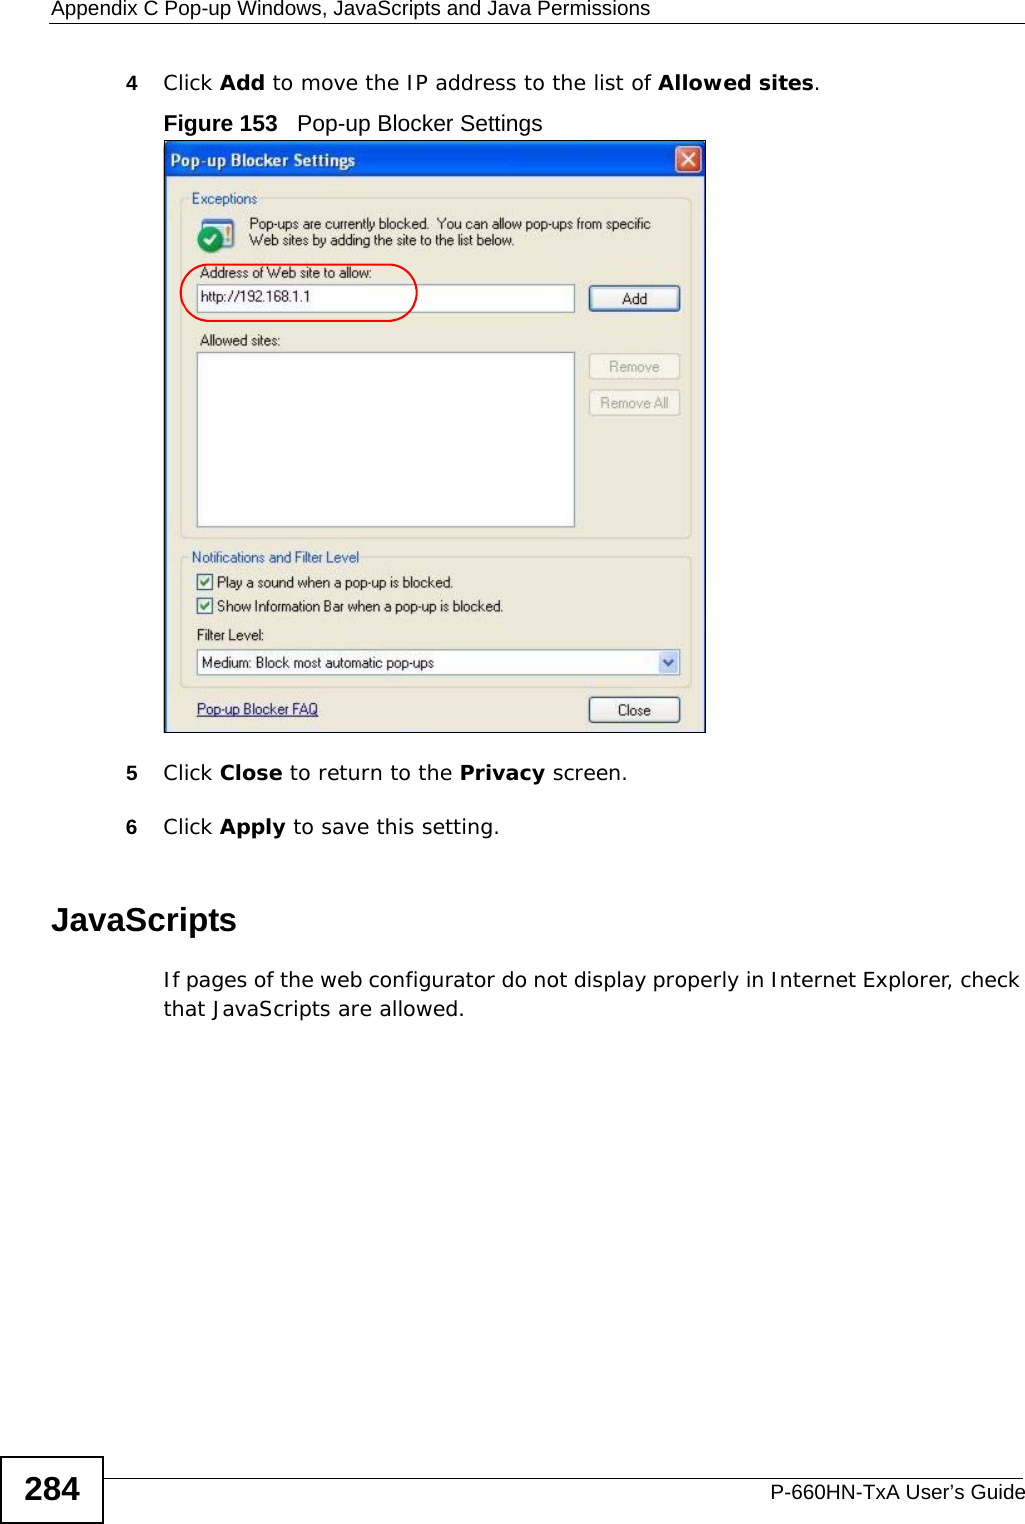 Appendix C Pop-up Windows, JavaScripts and Java PermissionsP-660HN-TxA User’s Guide2844Click Add to move the IP address to the list of Allowed sites.Figure 153   Pop-up Blocker Settings5Click Close to return to the Privacy screen. 6Click Apply to save this setting. JavaScriptsIf pages of the web configurator do not display properly in Internet Explorer, check that JavaScripts are allowed. 